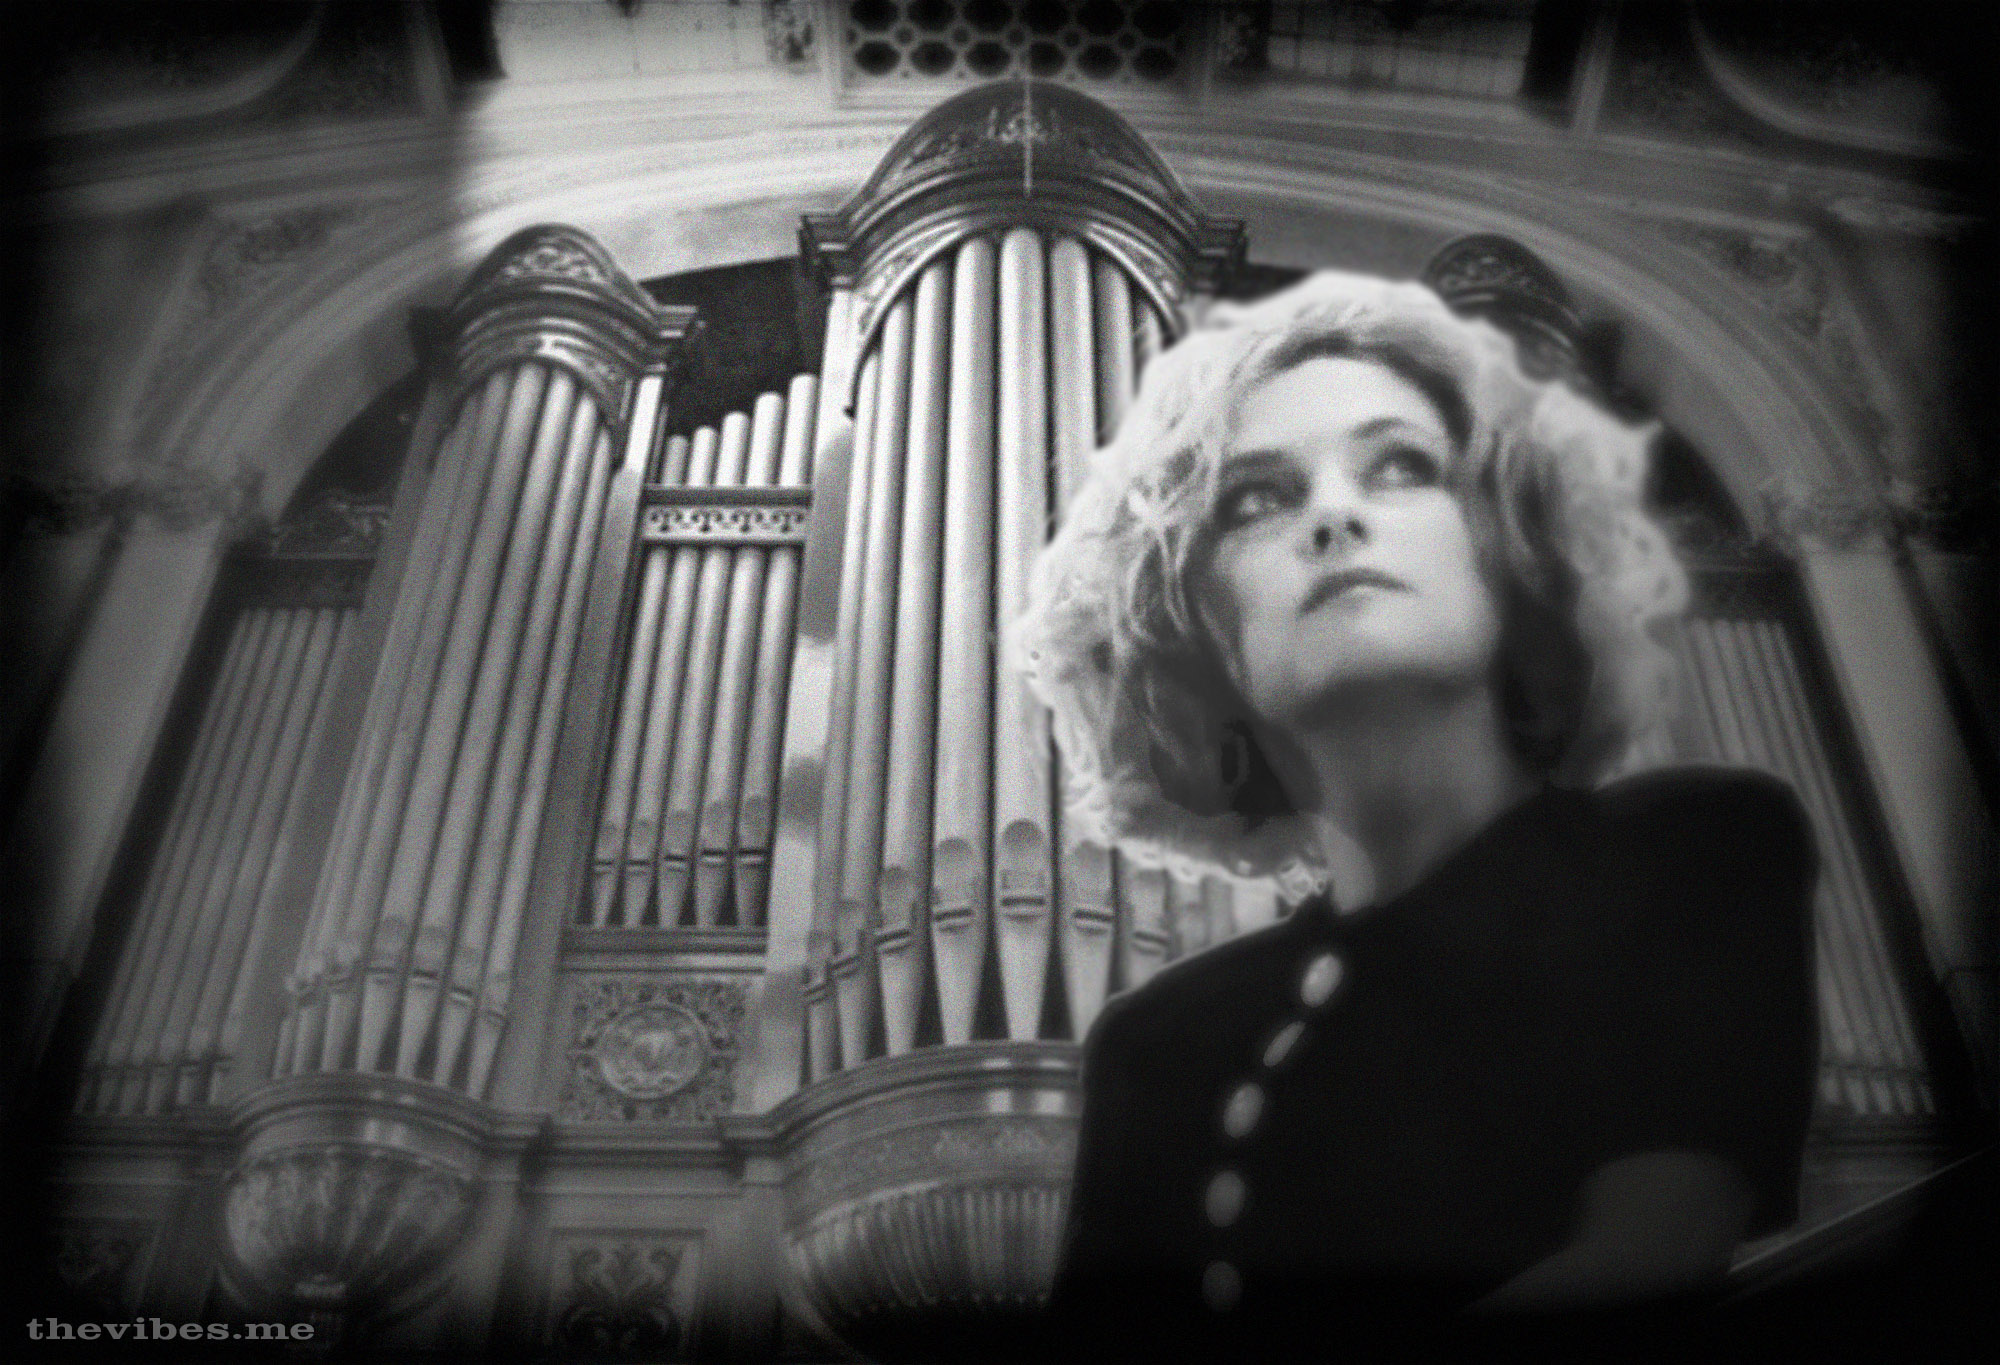 Goldfrapp – new album debut live at The Albert Hall | the vibes